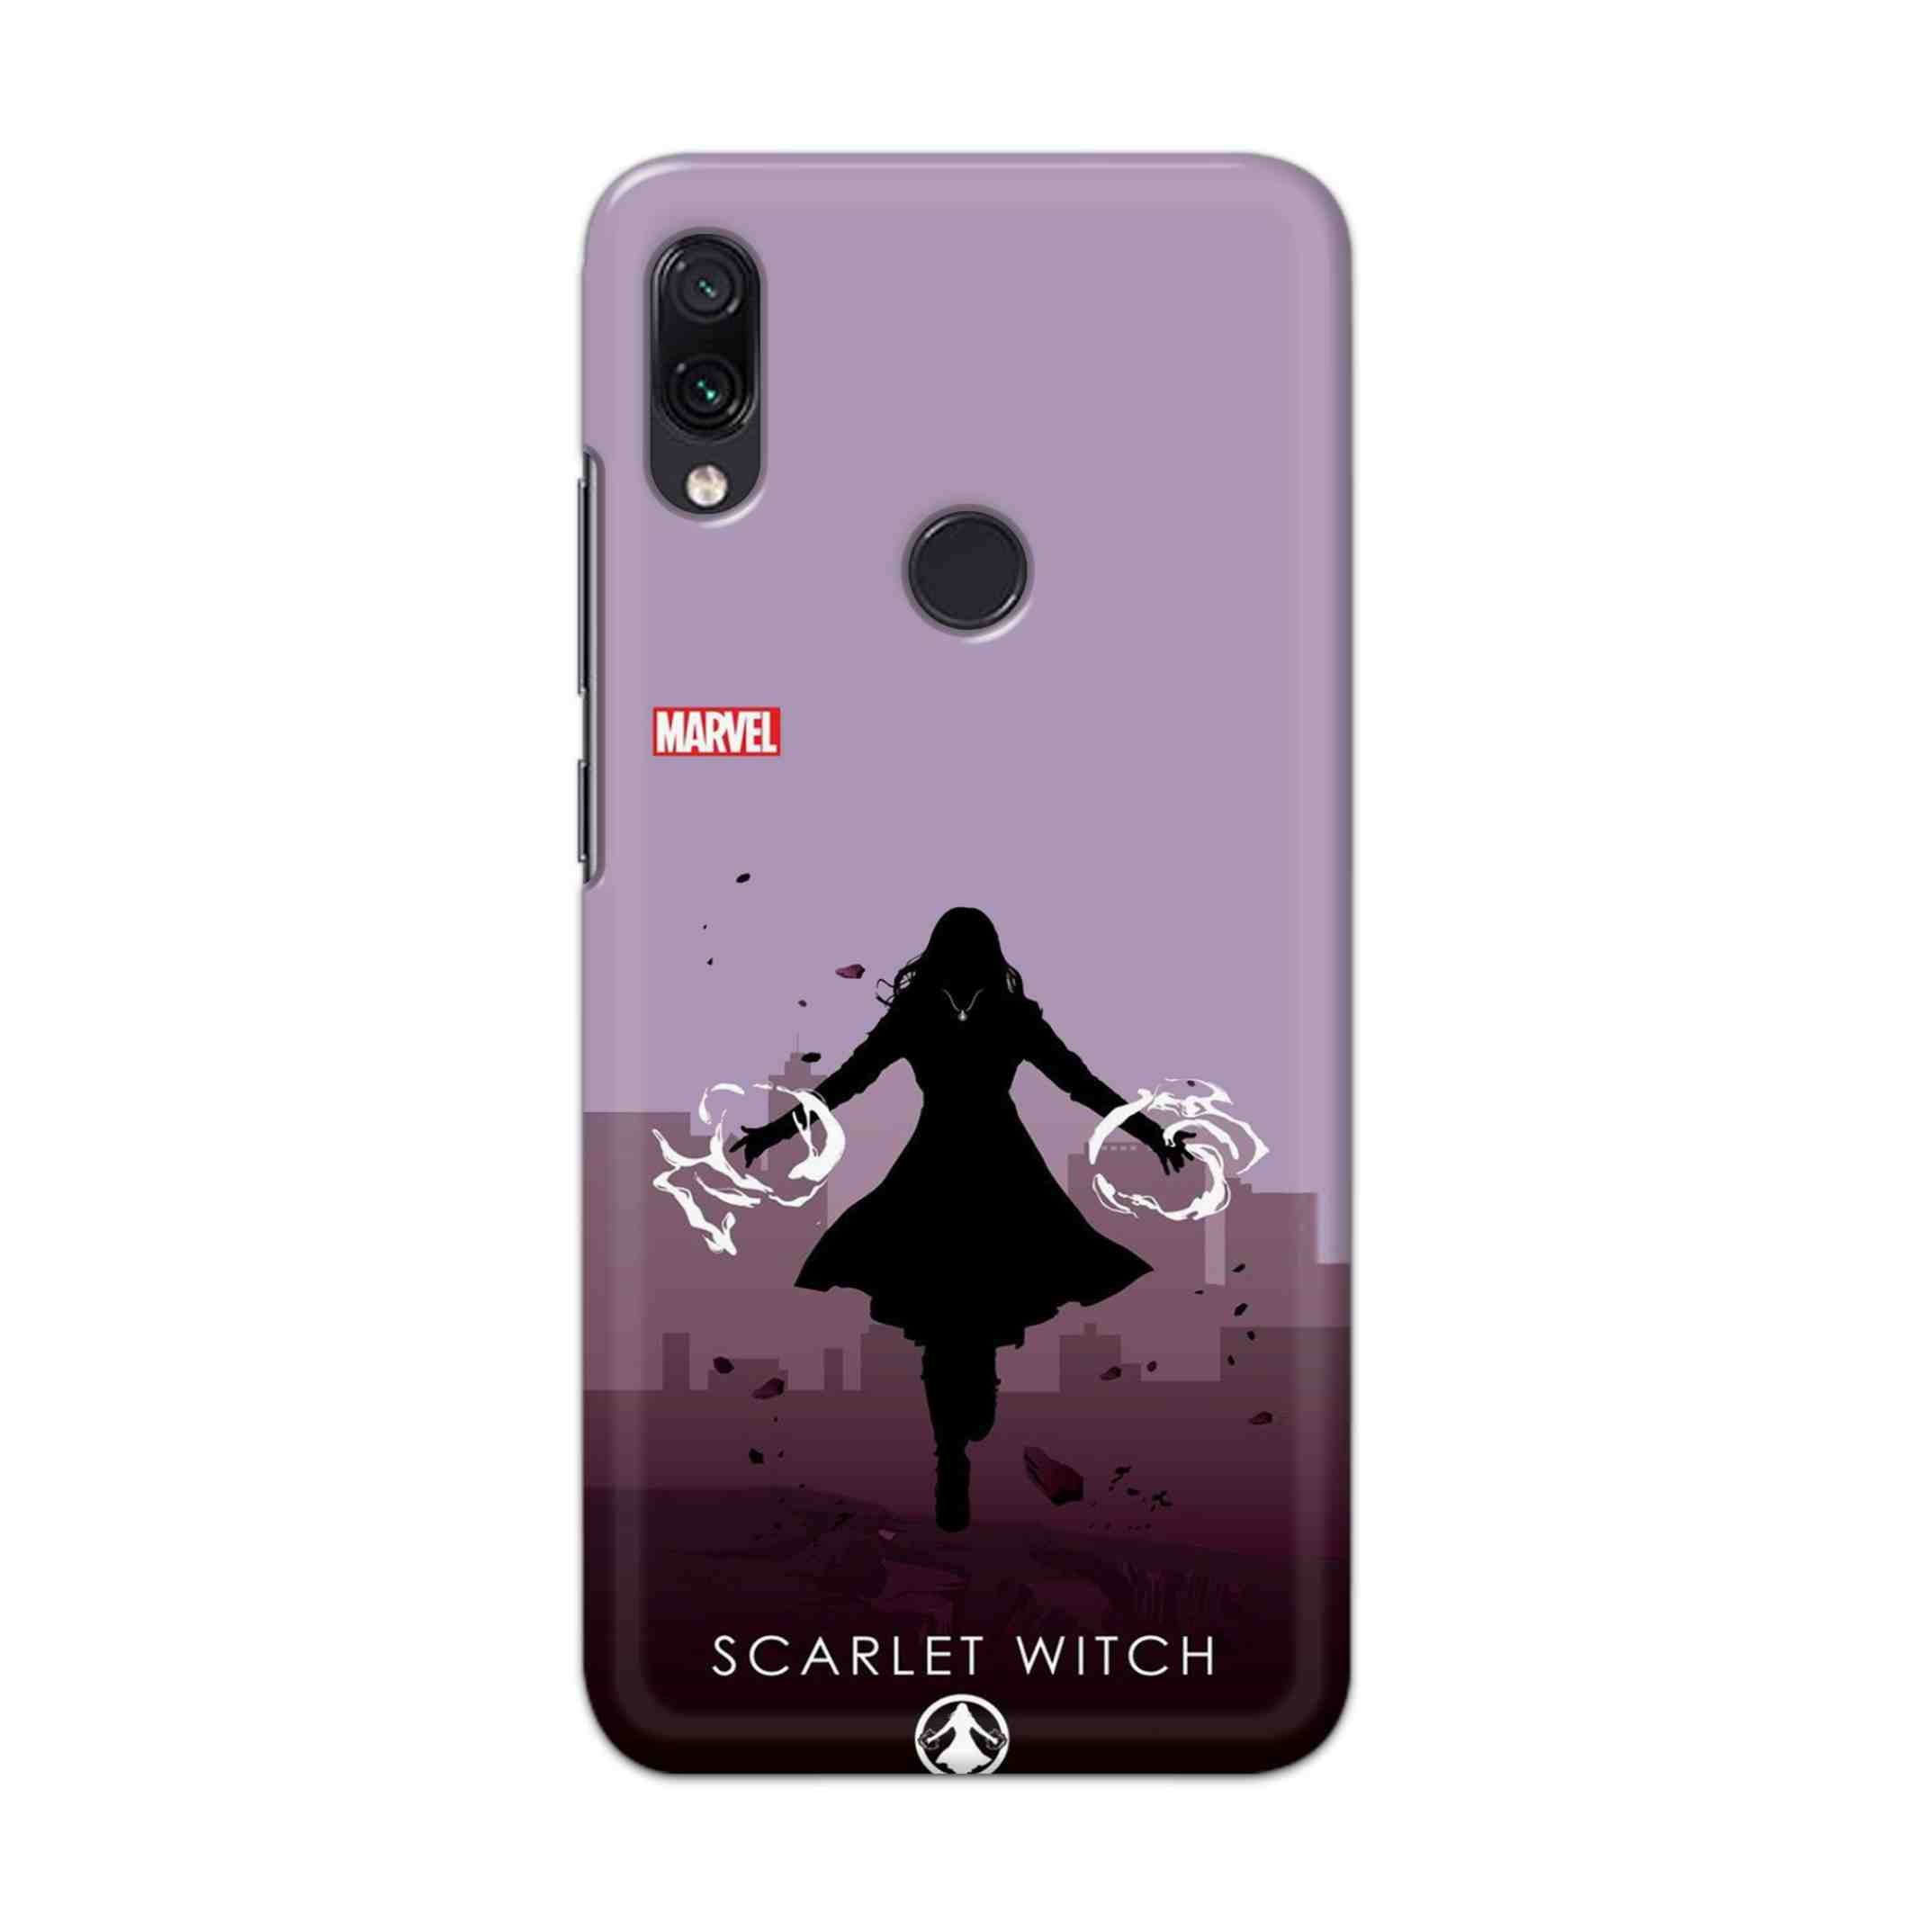 Buy Scarlet Witch Hard Back Mobile Phone Case Cover For Redmi Note 7 / Note 7 Pro Online